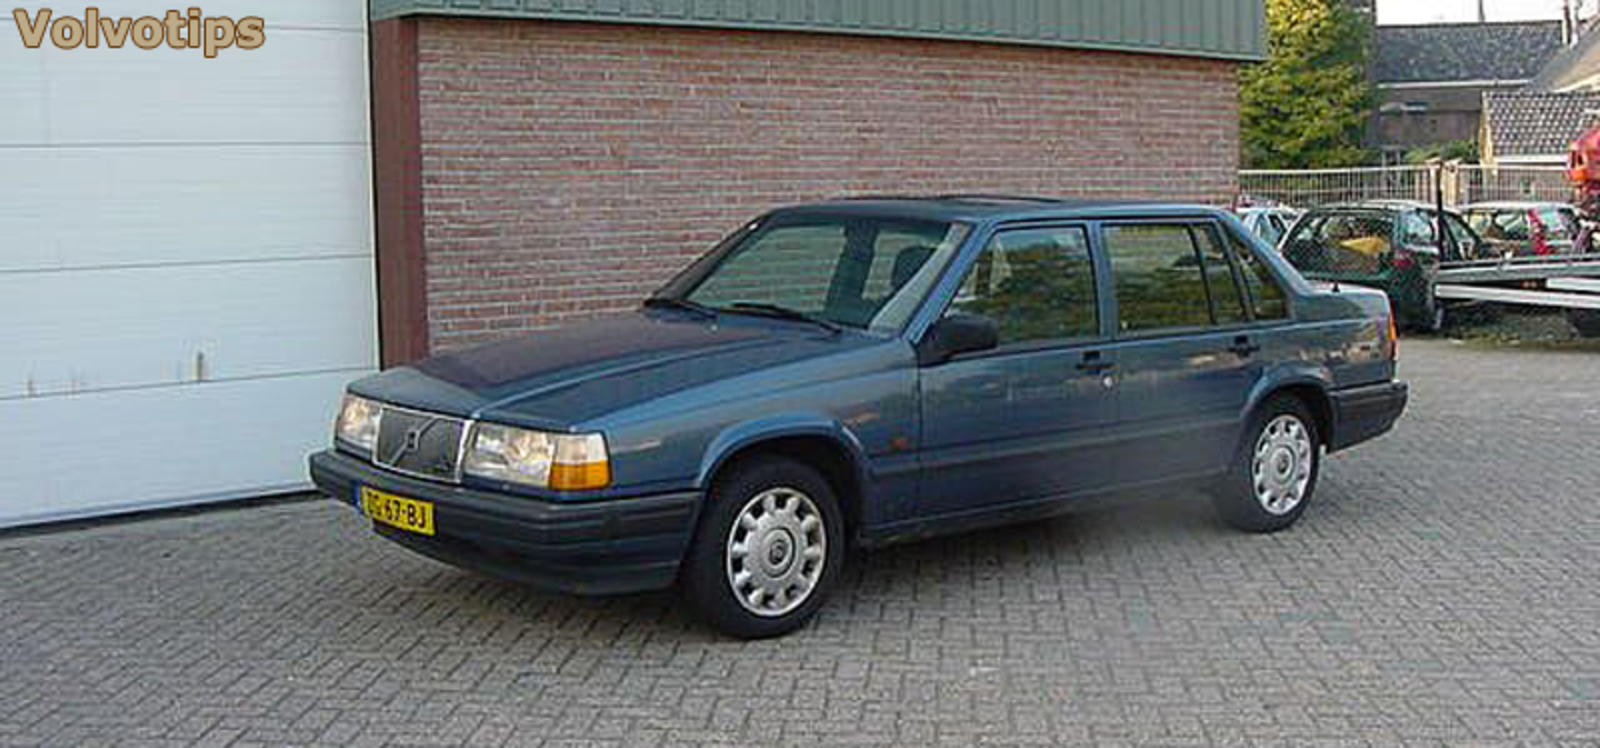 Volvo 940 GL Estate. View Download Wallpaper. 800x374. Comments